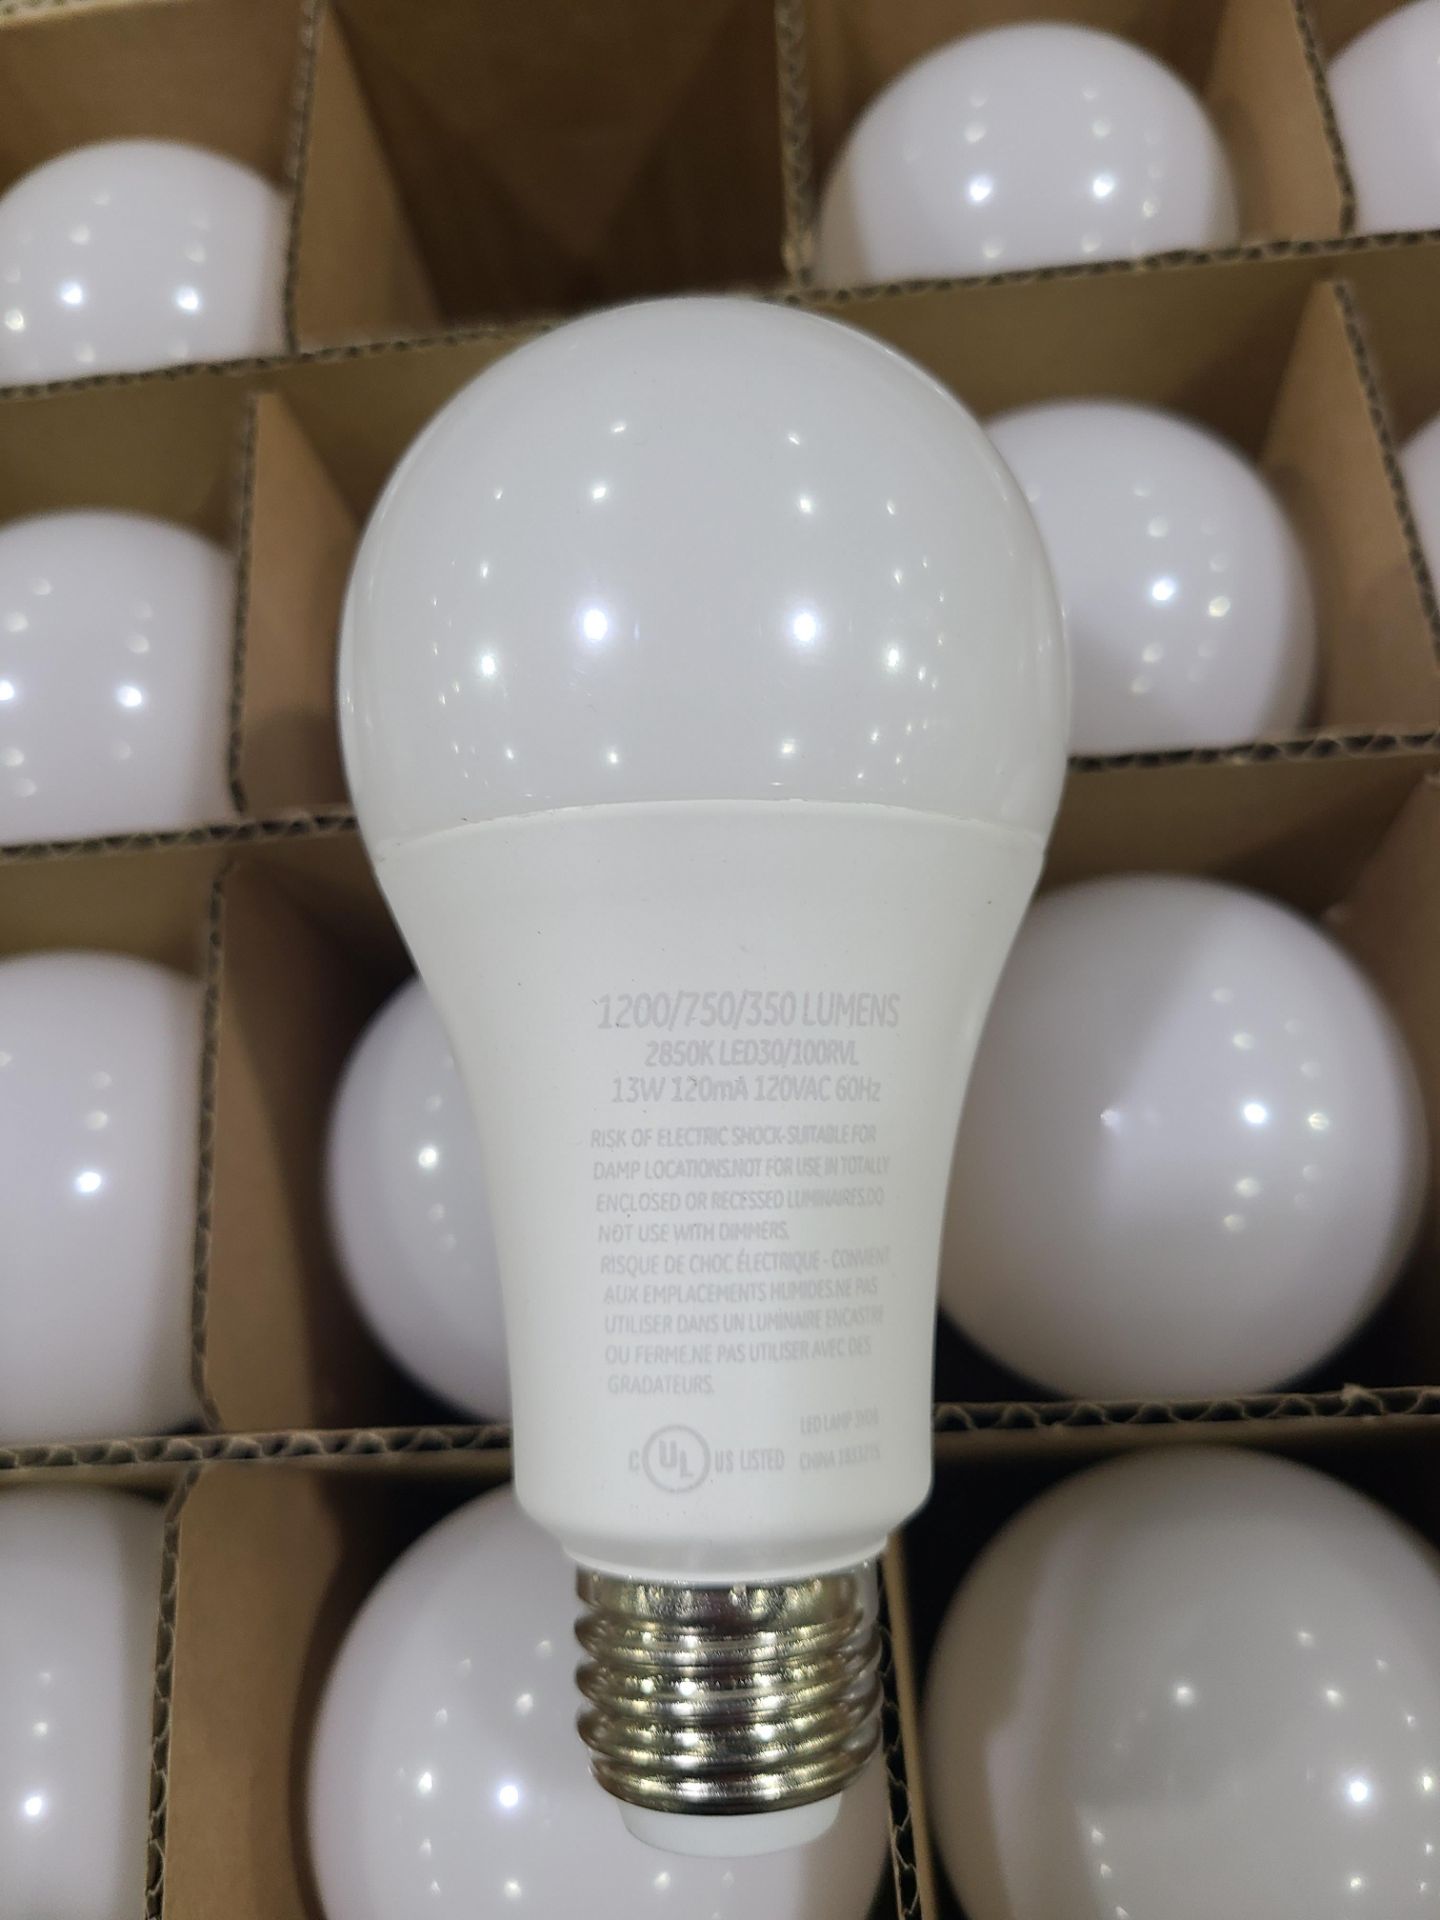 (770) GE LED DIMMABLE LIGHT BULB - Image 2 of 3